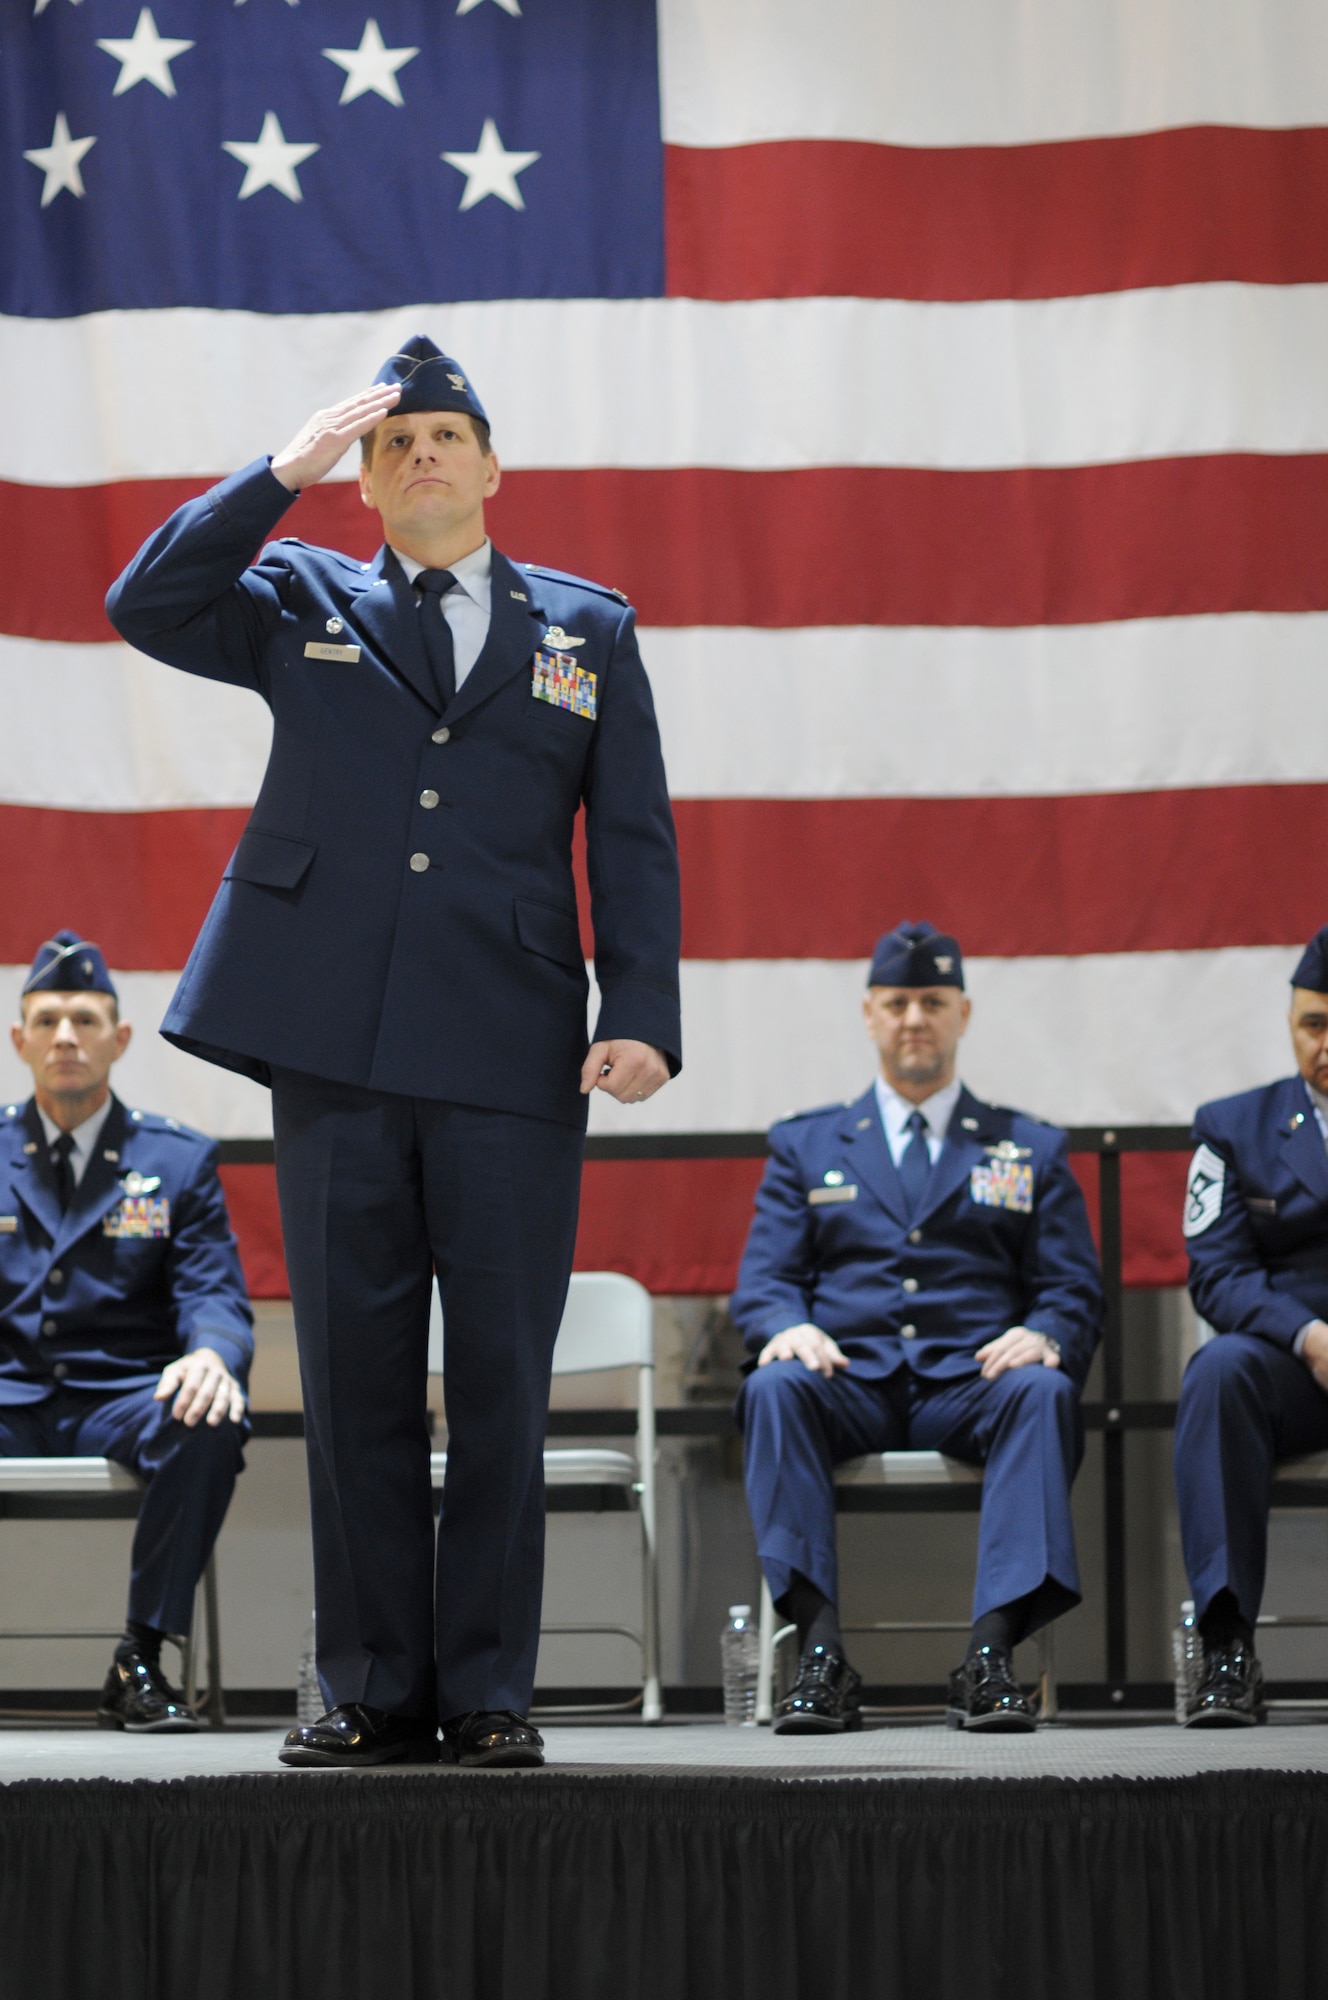 A picture of Col. Kerry M. Gentry, former 177th Fighter Wing commander, saluting.